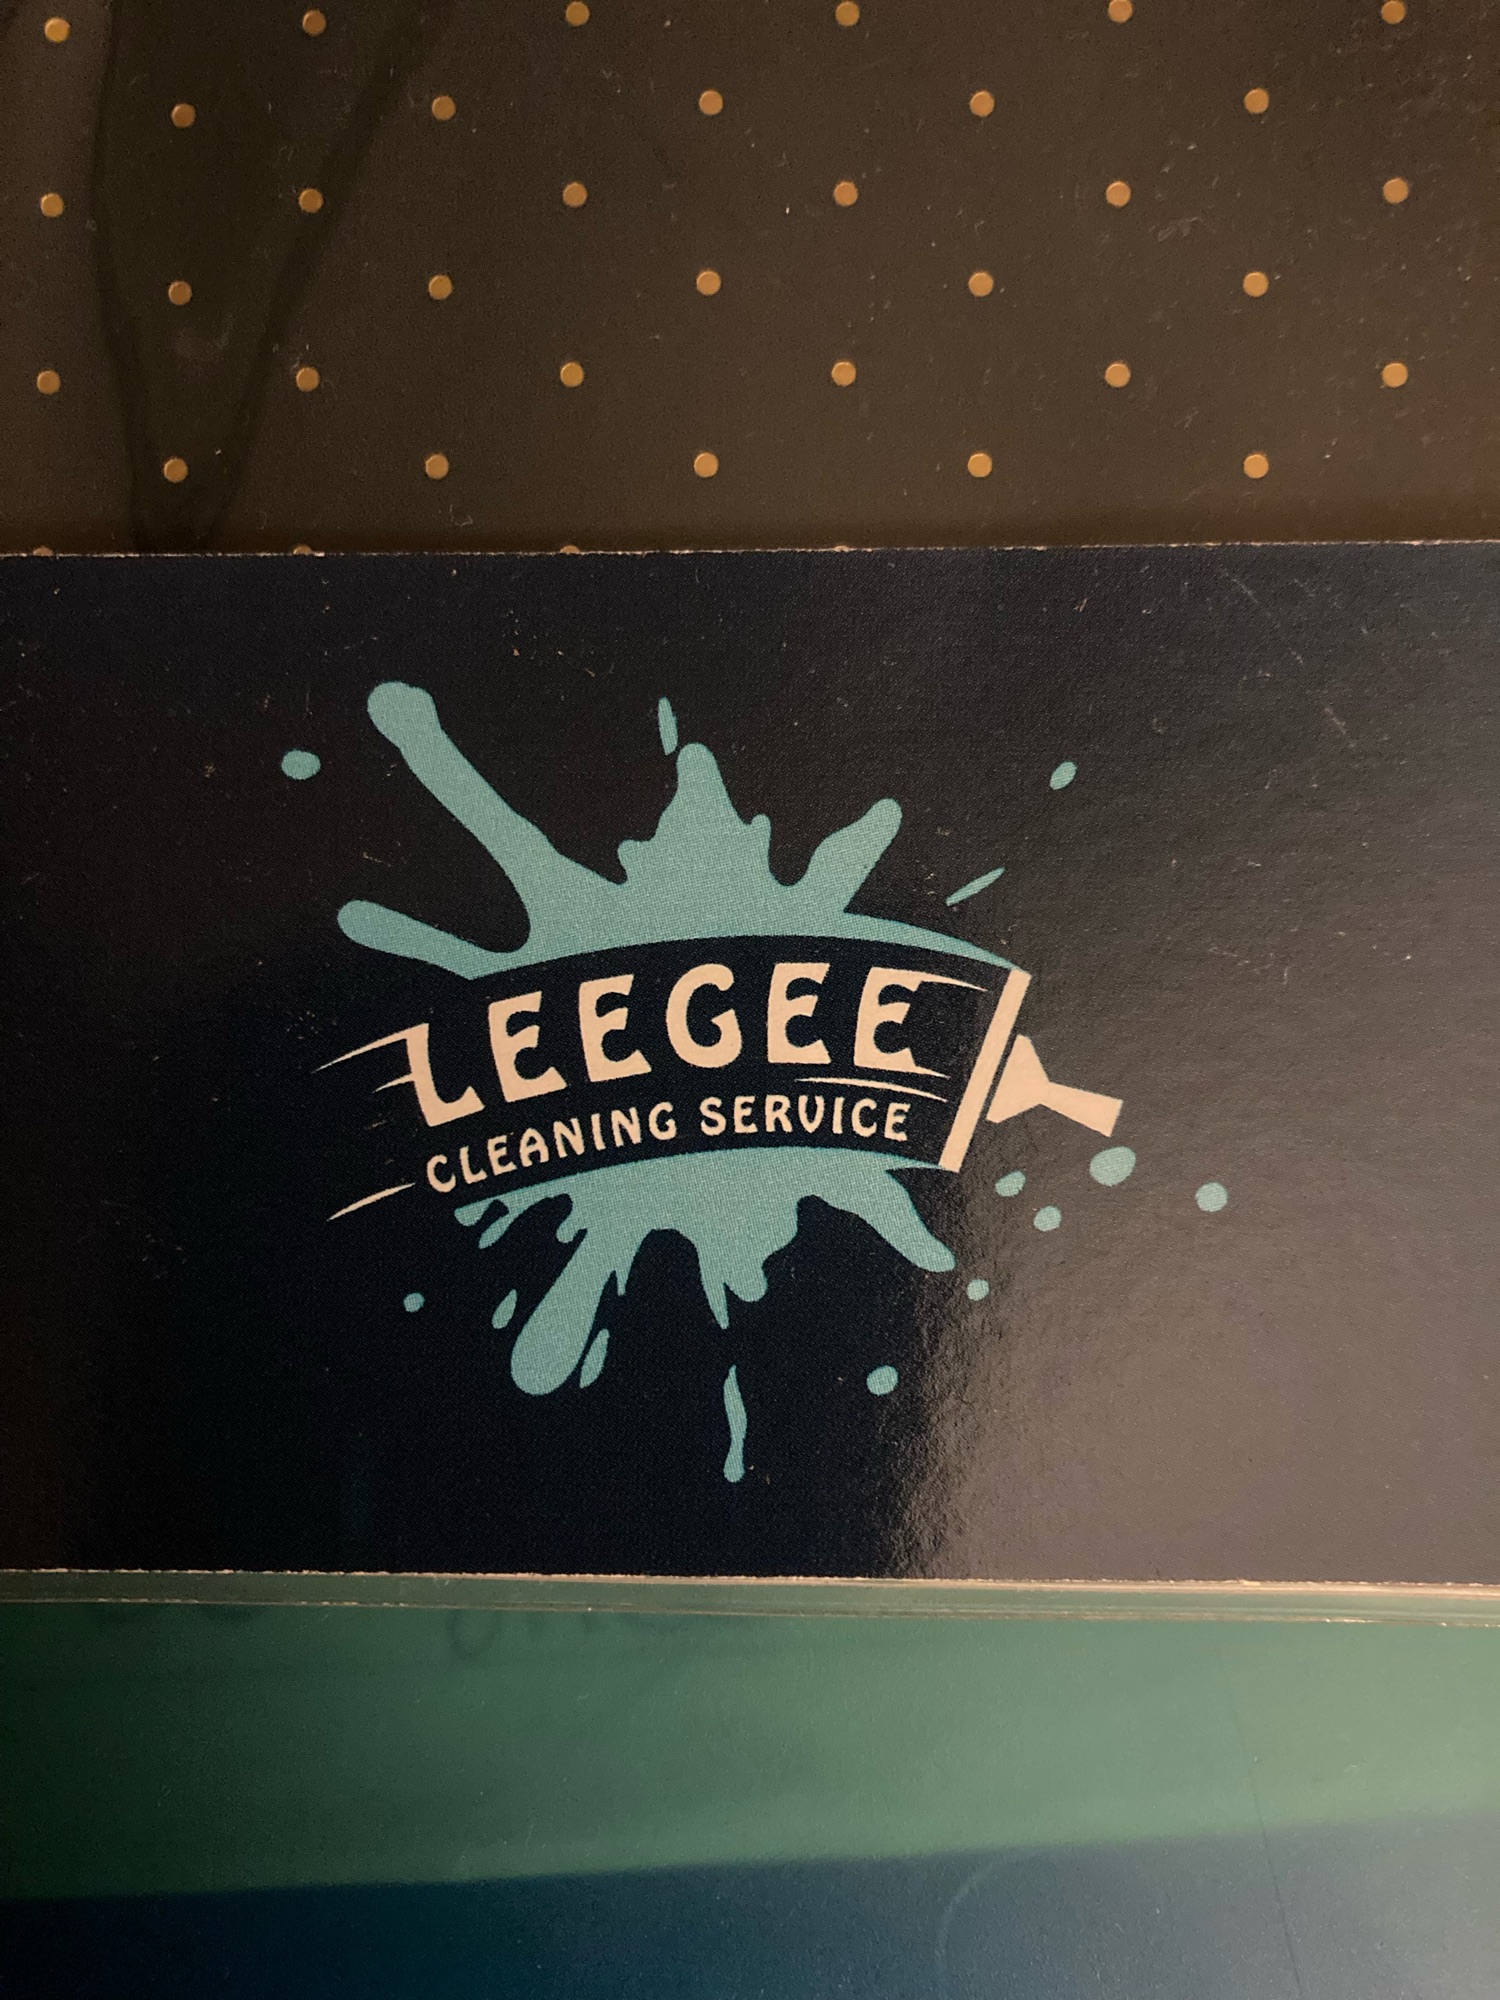 Lee Gee Cleaning Services Logo